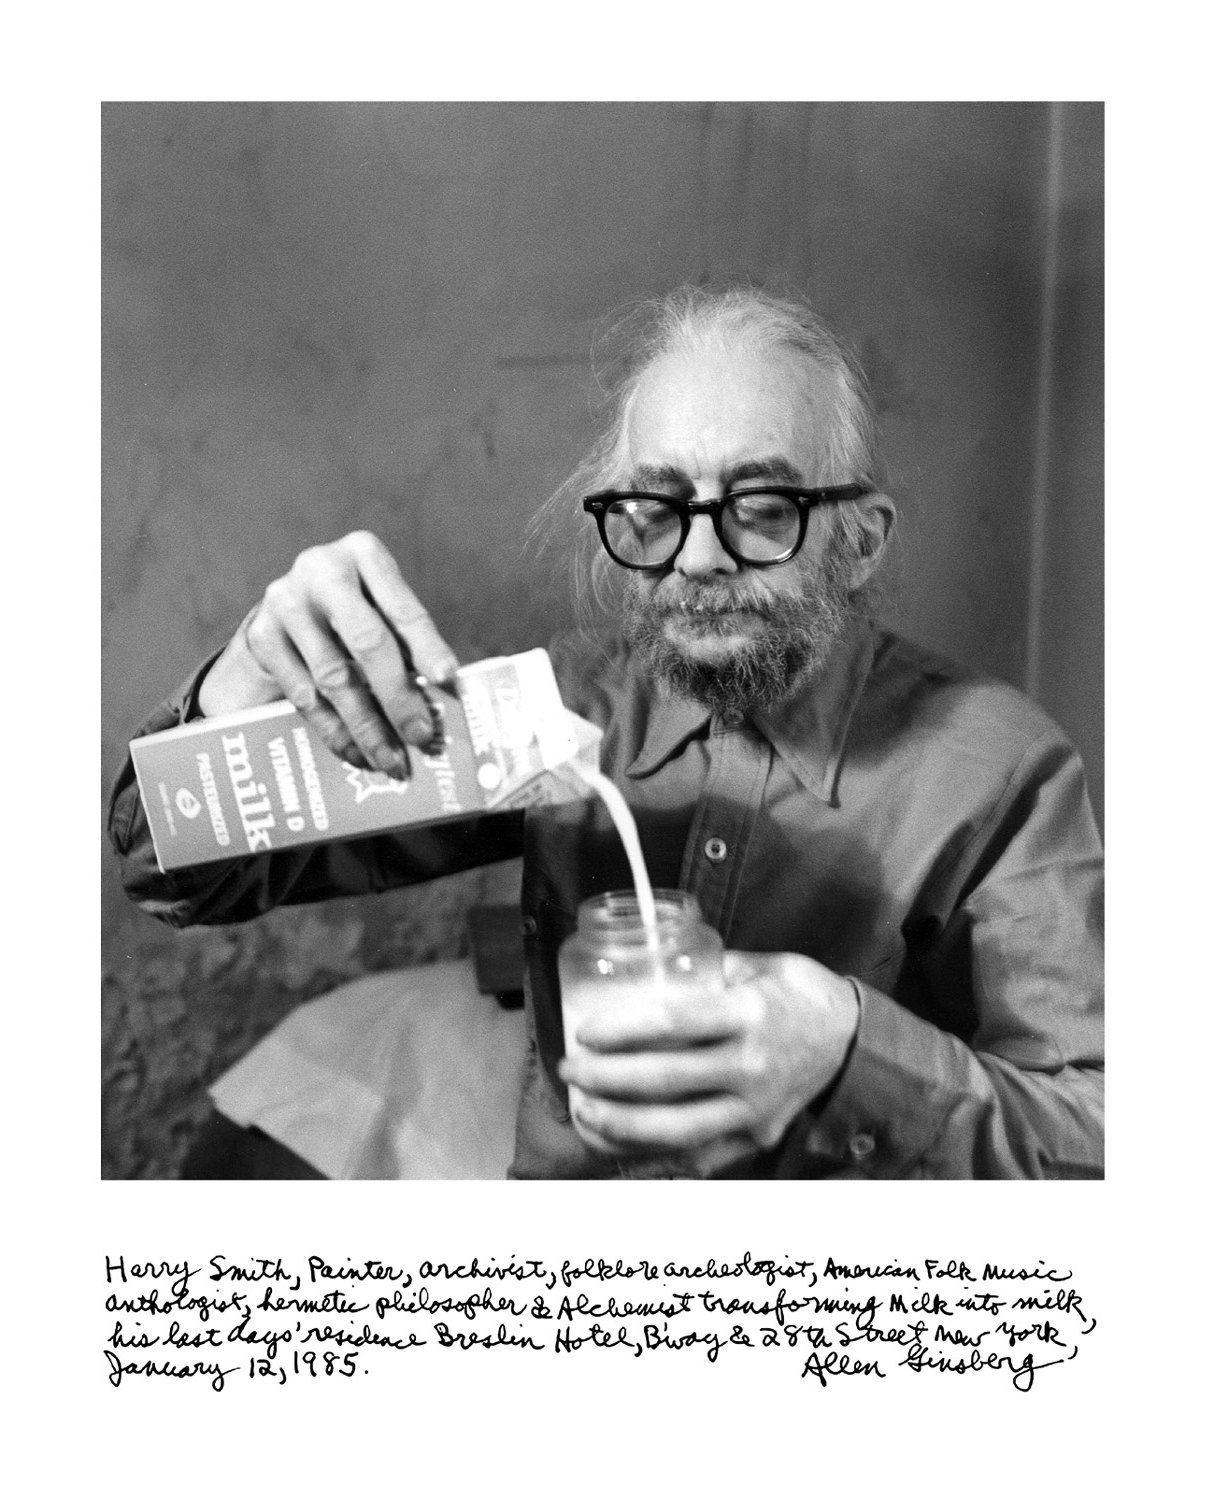 The front of a postcard, featuring Allen Ginsberg’s nineteen eighty five photograph captioned “Harry Smith Transforming Milk into Milk,” of Harry Smith pouring milk into a half-full glass of milk, with a handwritten scrawled caption that reads, “Harry Smith, painter, archivist, folklore archeologist, American folk music anthologist, hermetic philosopher and alchemist transforming milk into milk, his last day o’ residence Breslin Hotel, B’way and Twenty Eighth Stress New York, January Twelfth Nineteen Eighty Five, Allen Ginsberg.”